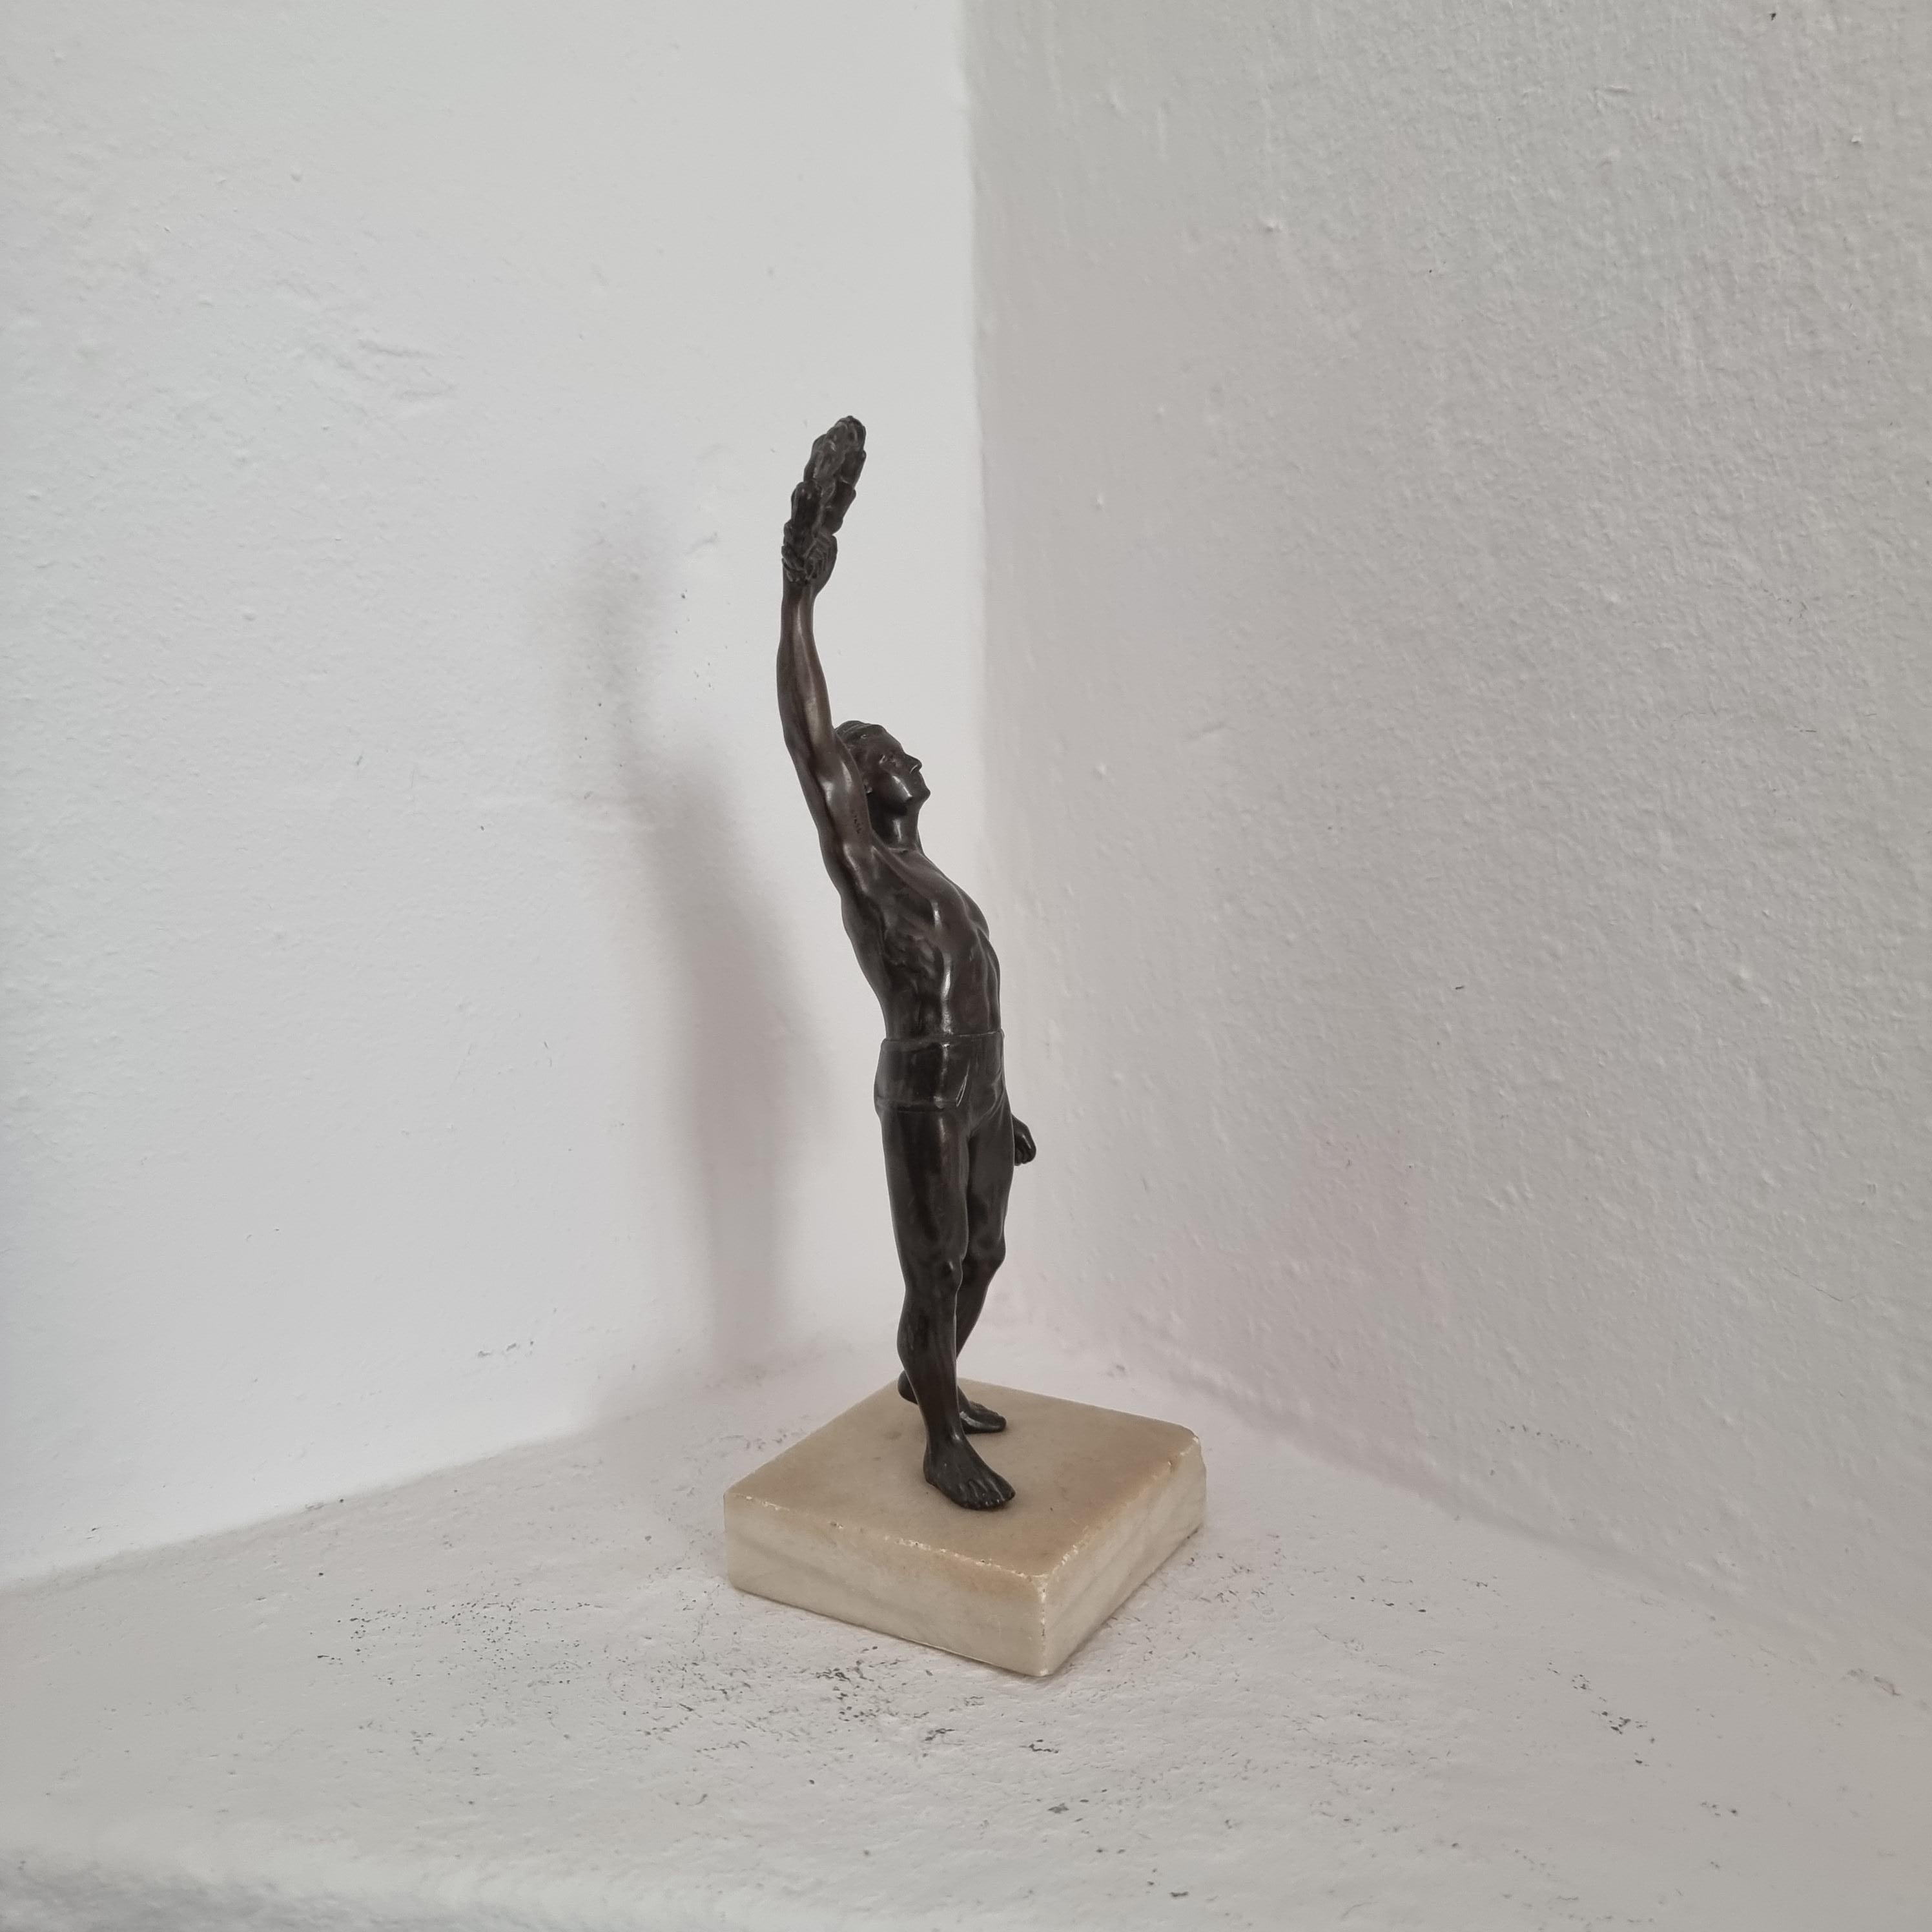 Mid-20th Century Sculpture / Prize, Athlete with Laurel-Crown, Bronze patinated zinc and marble